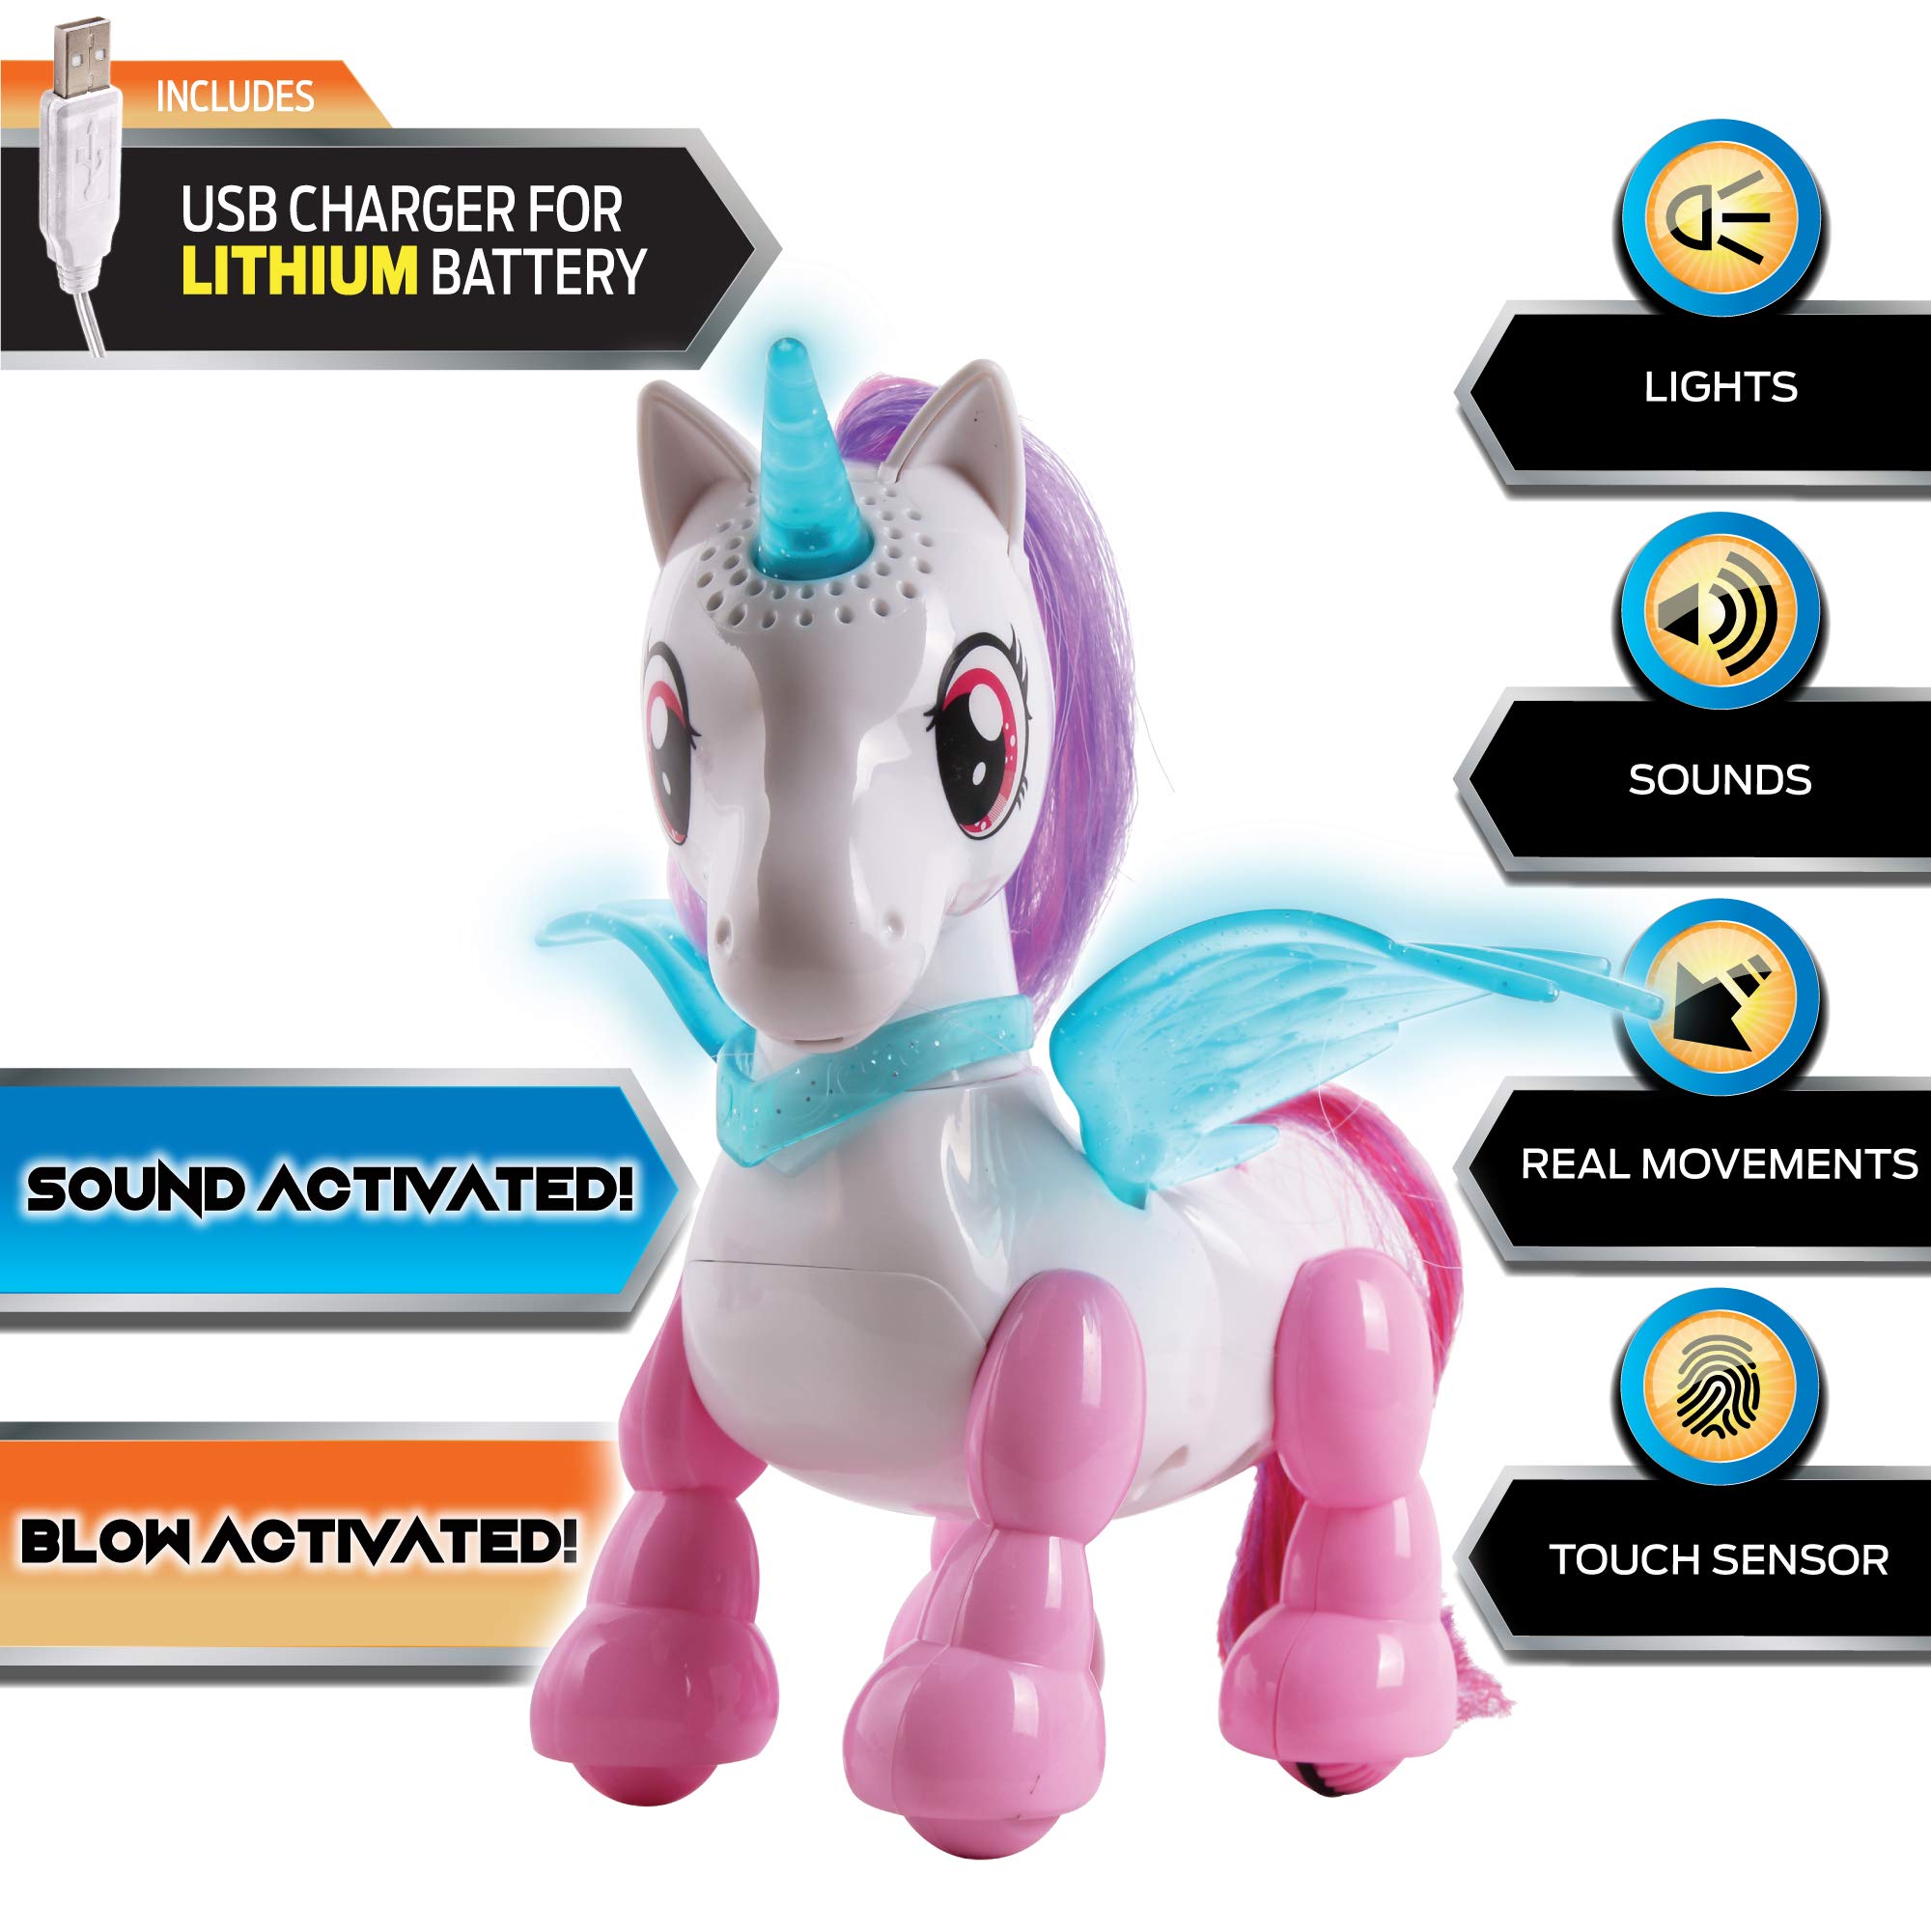 NKOK USB PetBotz - Robo Unicorn, Rechargeable, Miniature, Interactive pet Robot, Lights up, Sound Activated, Makes Noises on Command, Comes with Necklace and Hair Brush, USB Charger Included